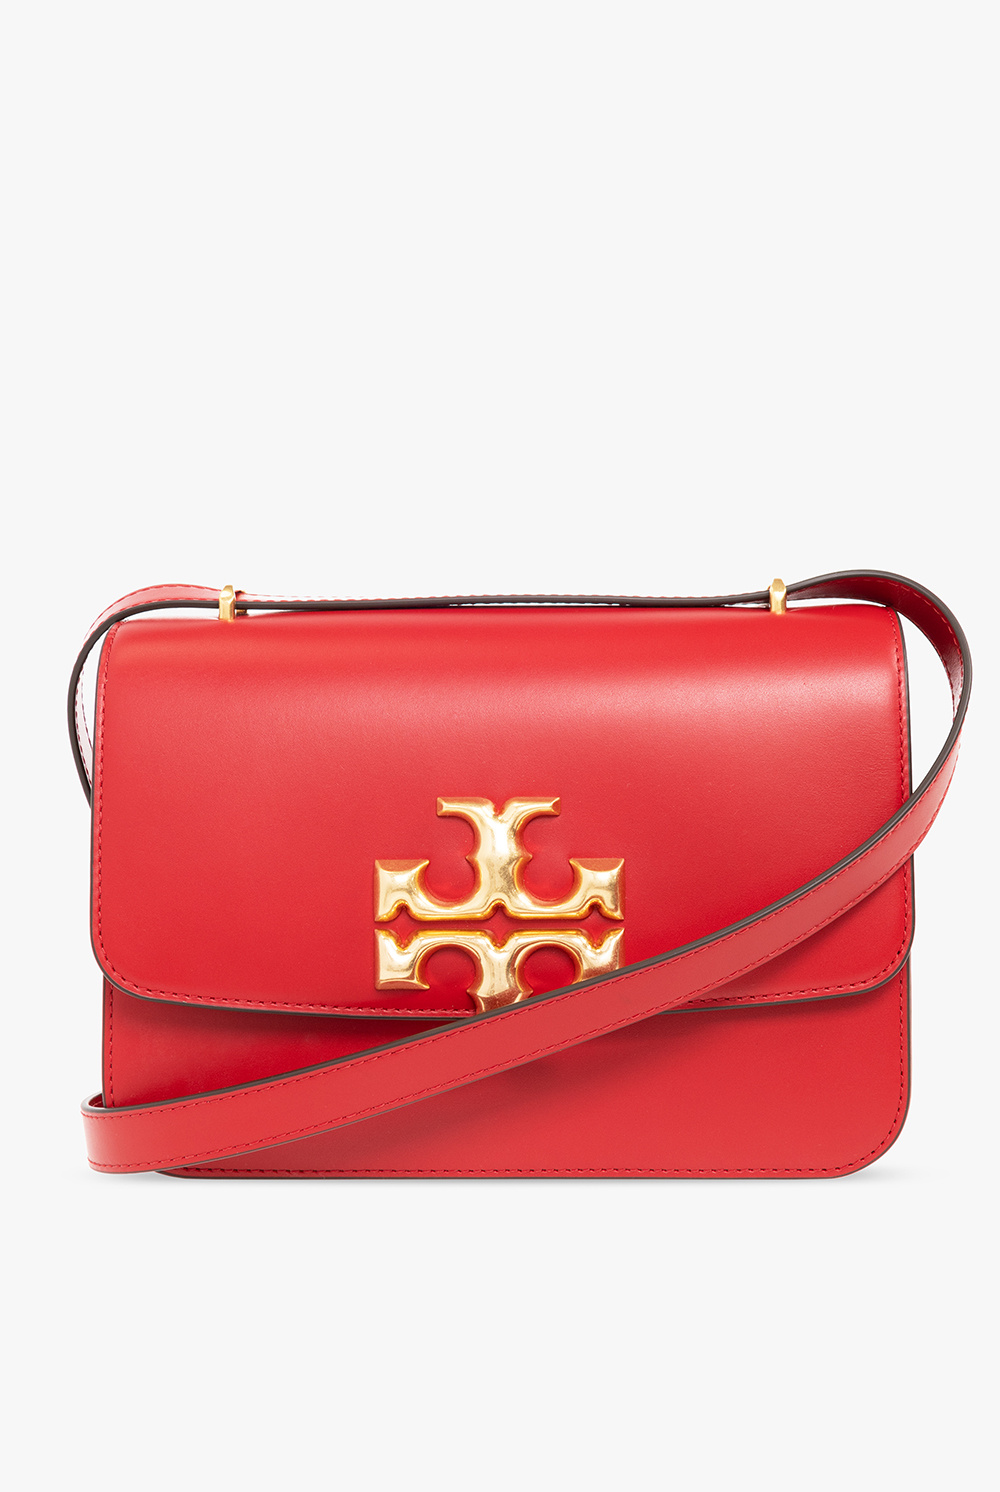 $789.00!! LOUIS VUITTON LUXURY WOMEN'S RED PATENT LEATHER